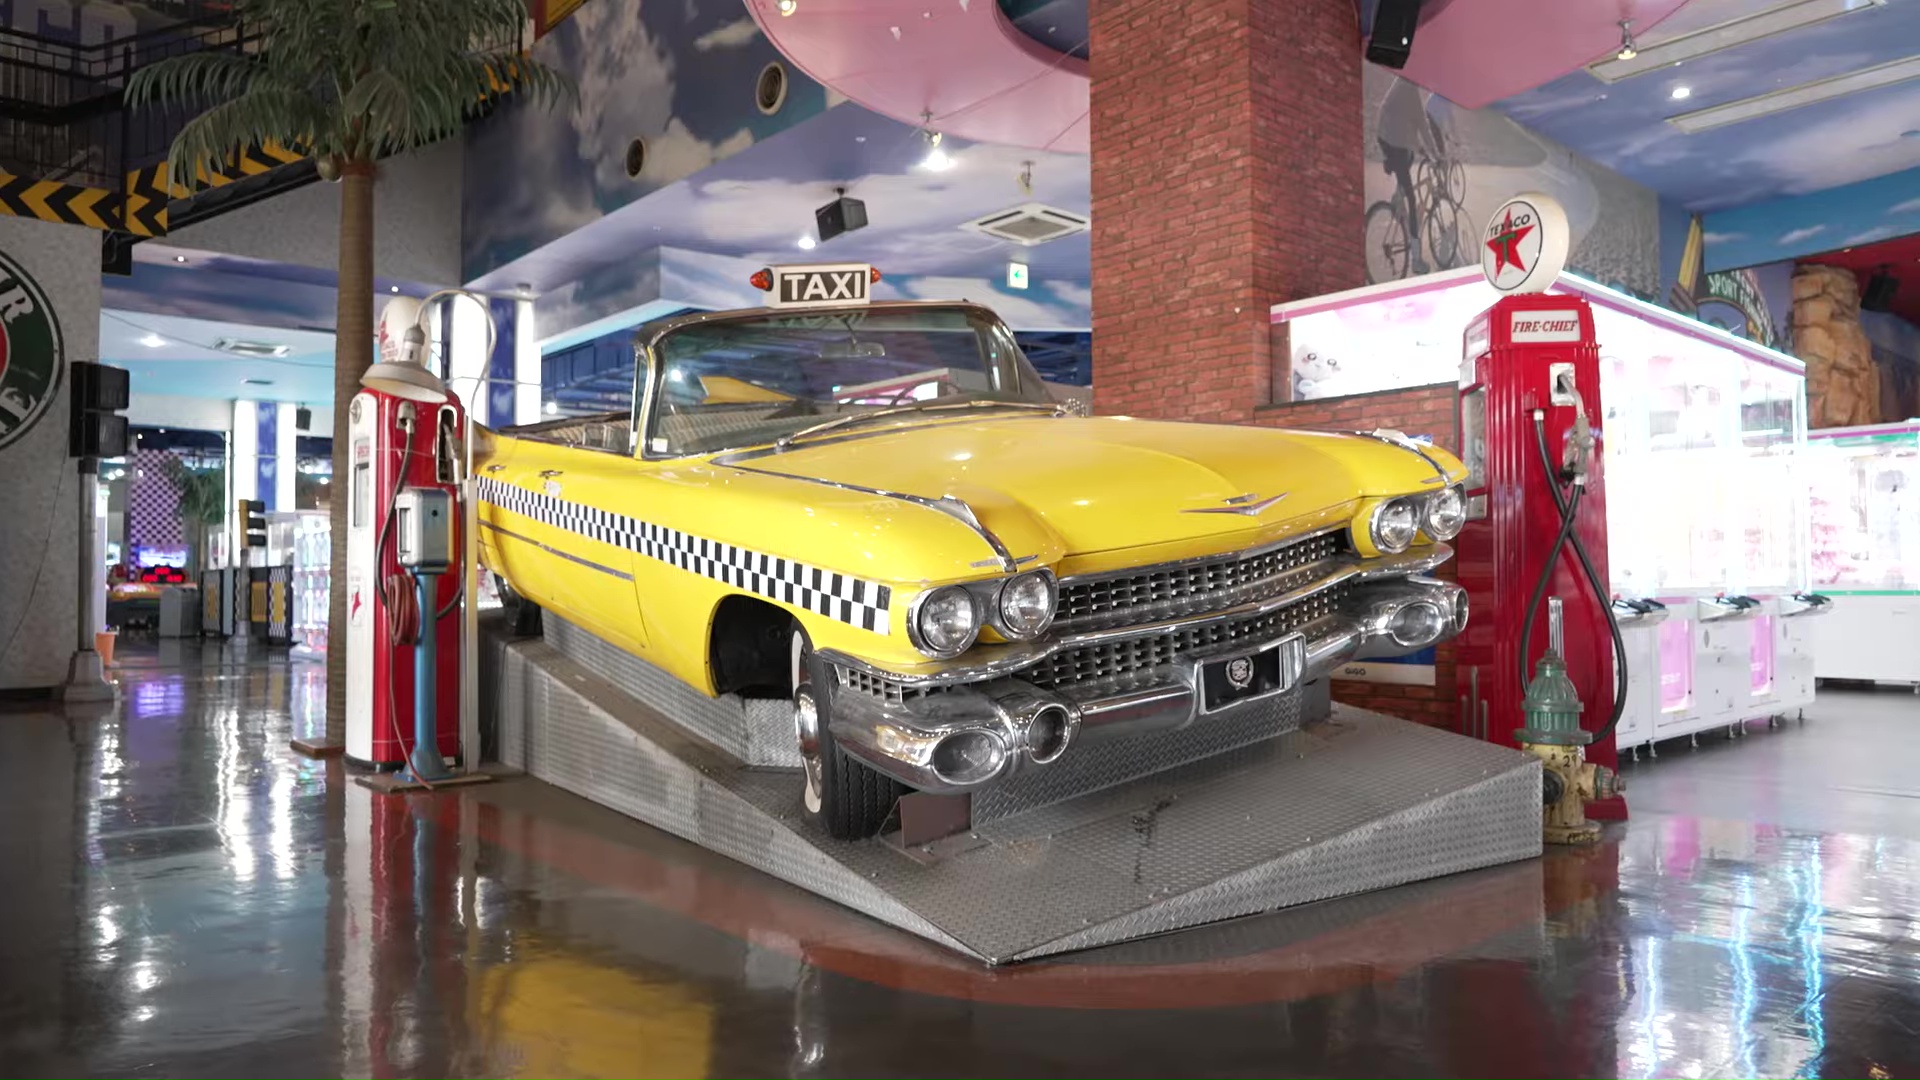 A real 1960s Cadillac done up in taxicab yellow, like in Crazy Taxi, is pictured in a Sega display